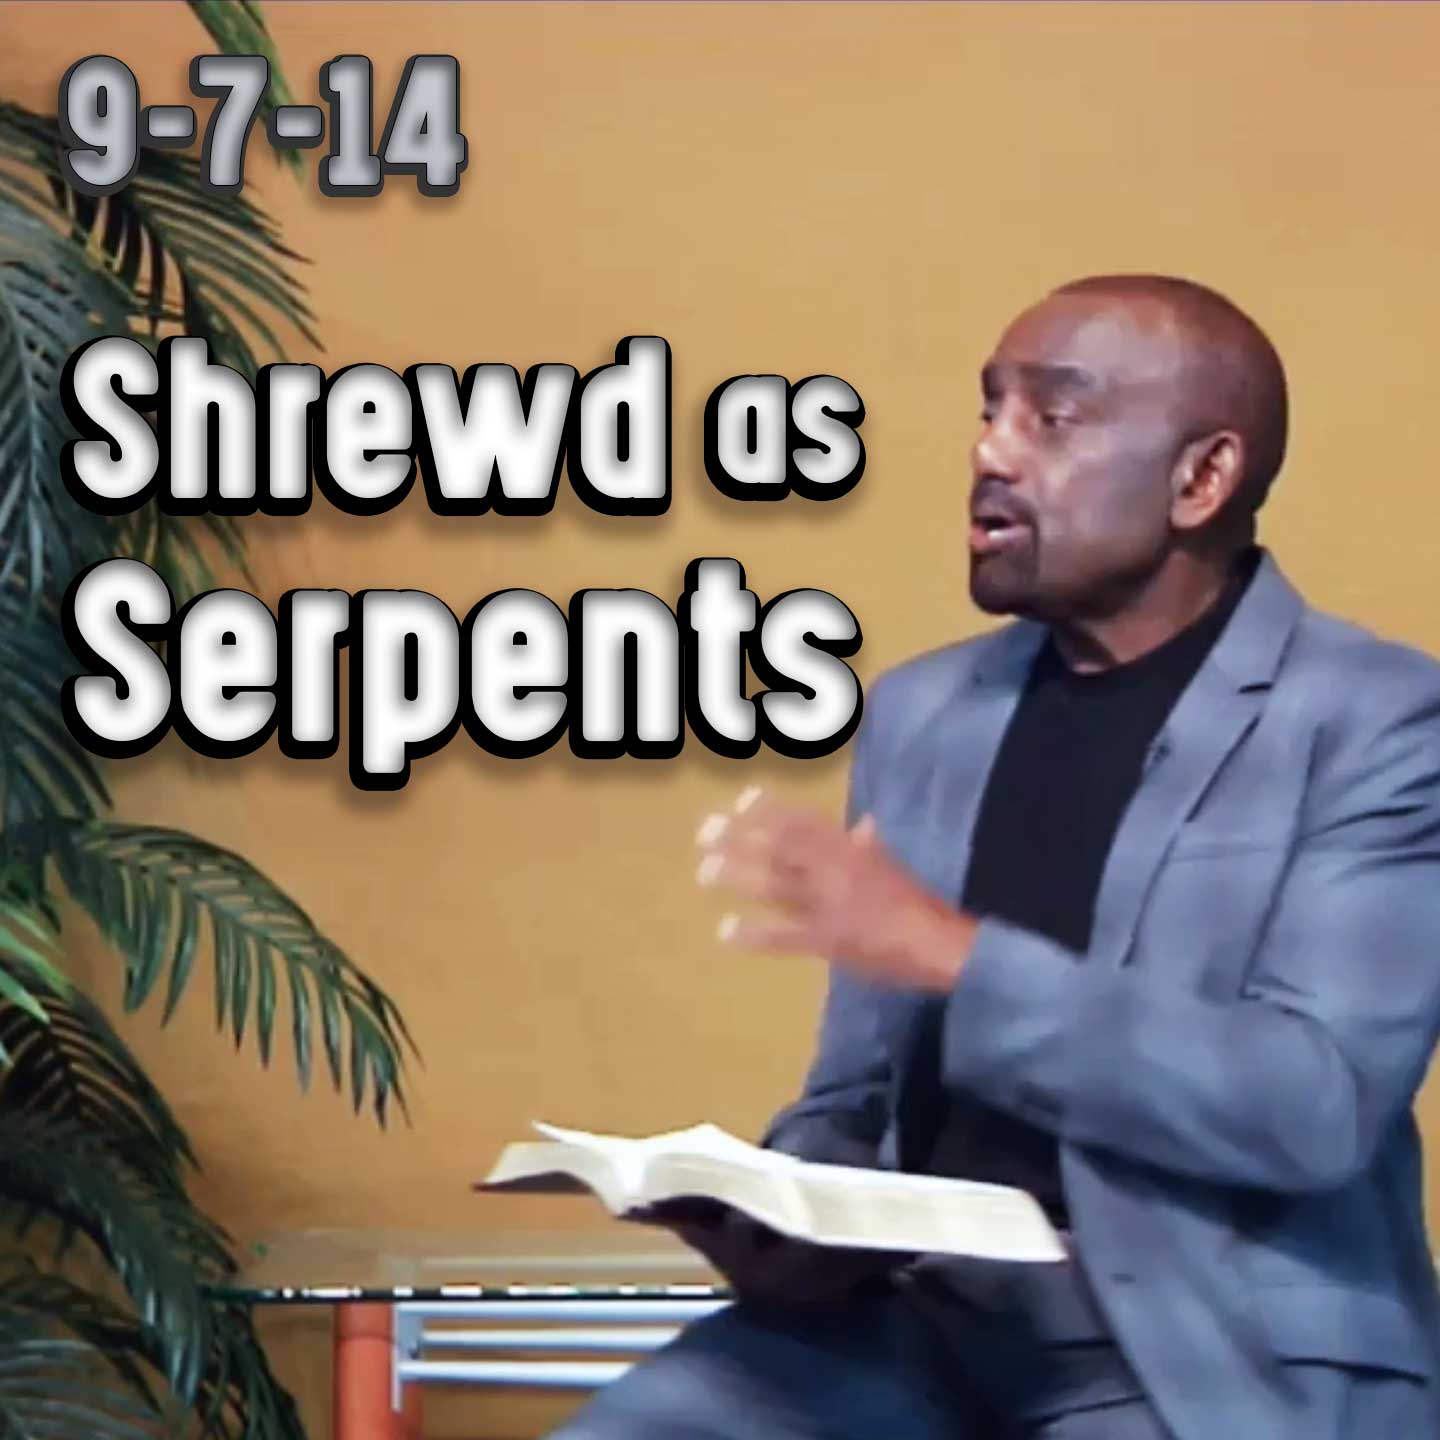 Are Christians Winning the Spiritual War? Archive 9/7/14 (Cunning as Snakes / Shrewd as Serpents)